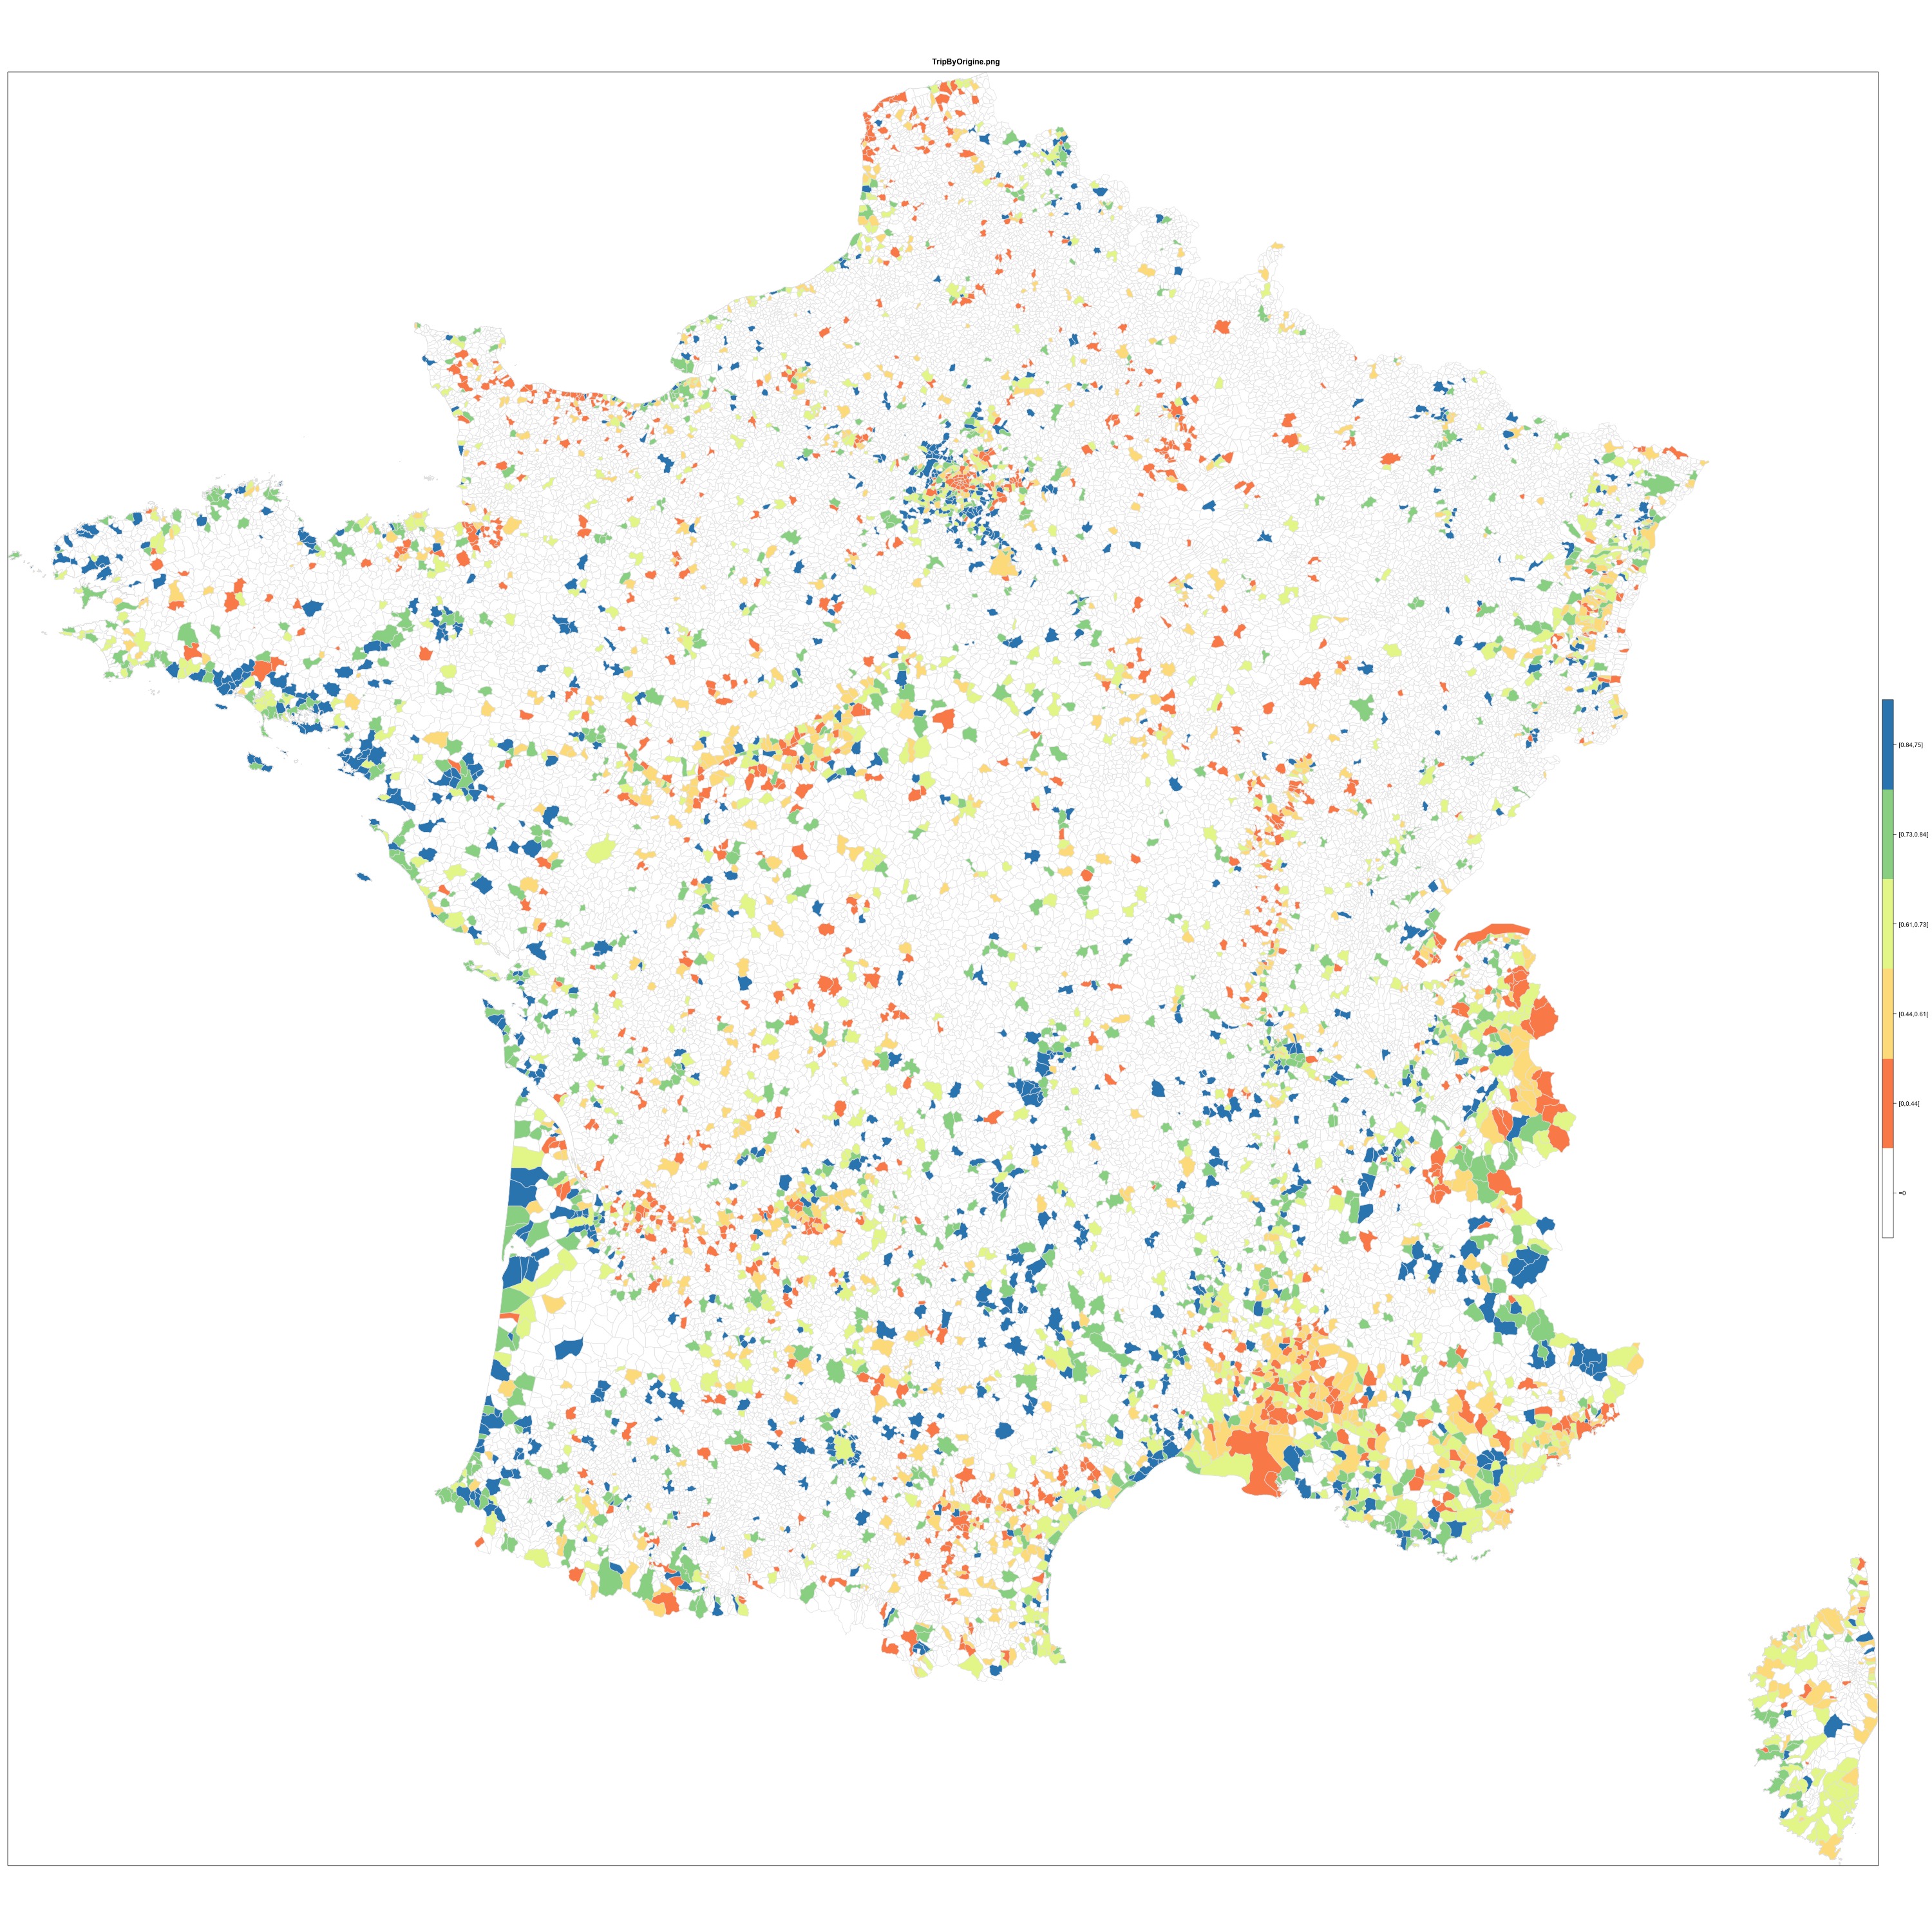 Map 3 : Communes through the prism of the reviewer’s origins. A map of French communes coloured according to the percentage of comments posted by French citizens (TripAdvisor). The categories rely on quartile calculations. Communes with less than 10 comments where the originating source is included are not represented. Source : Gaël Chareyron, Saskia Cousin, Jérôme Da Rugna and Sébastien Jacquot, 2014.